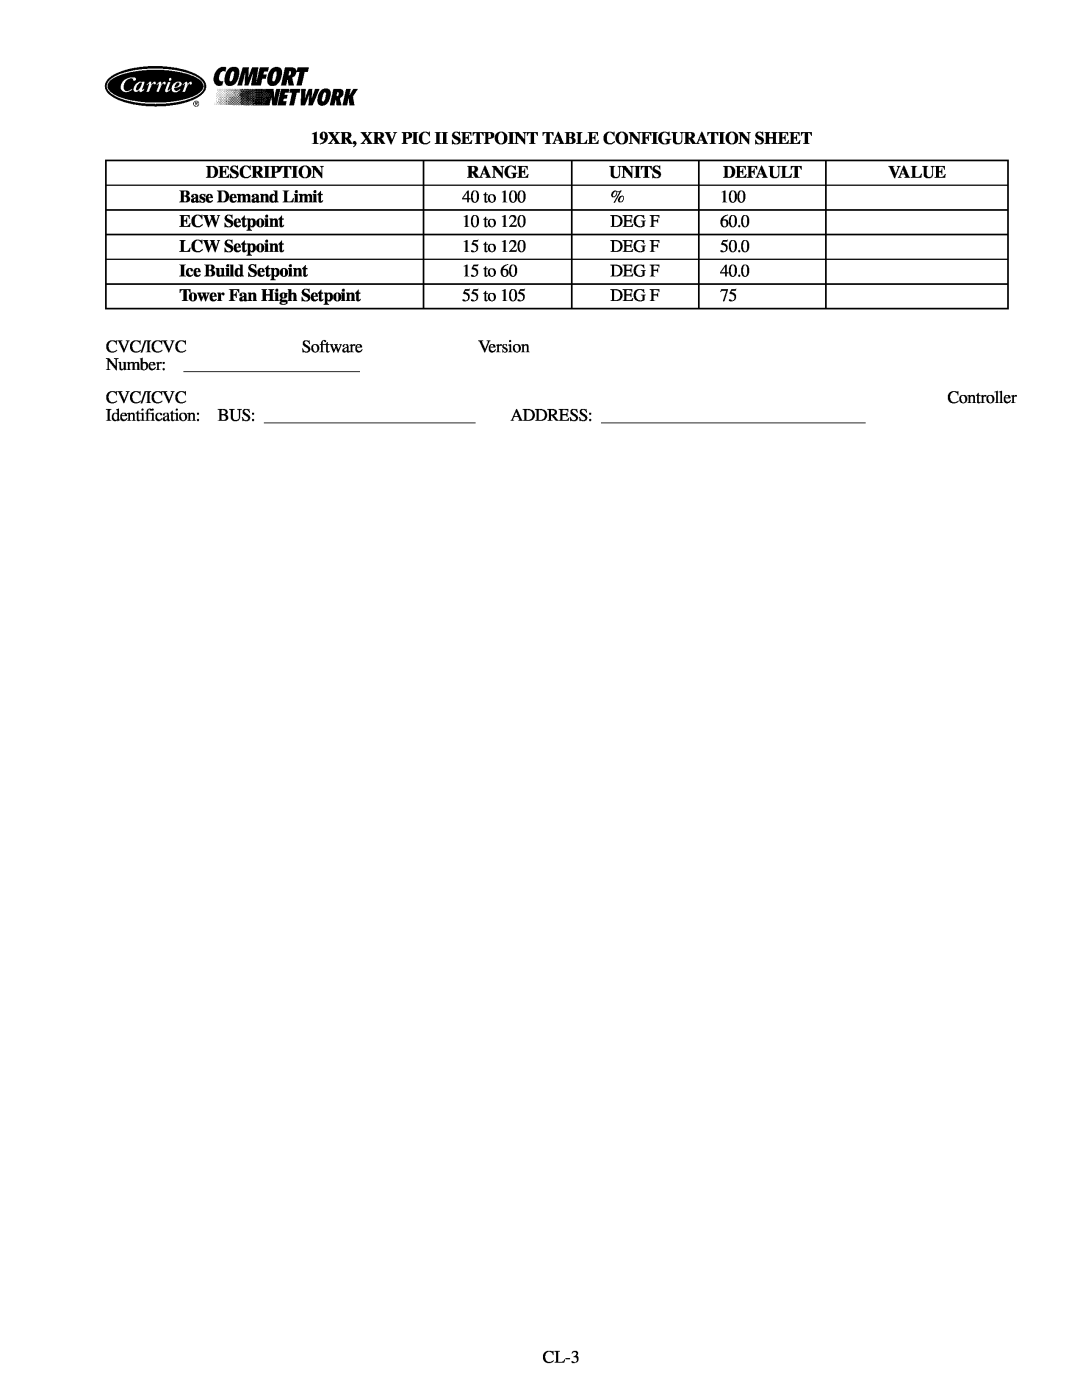 Carrier specifications 19XR, XRV PIC II SETPOINT TABLE CONFIGURATION SHEET 